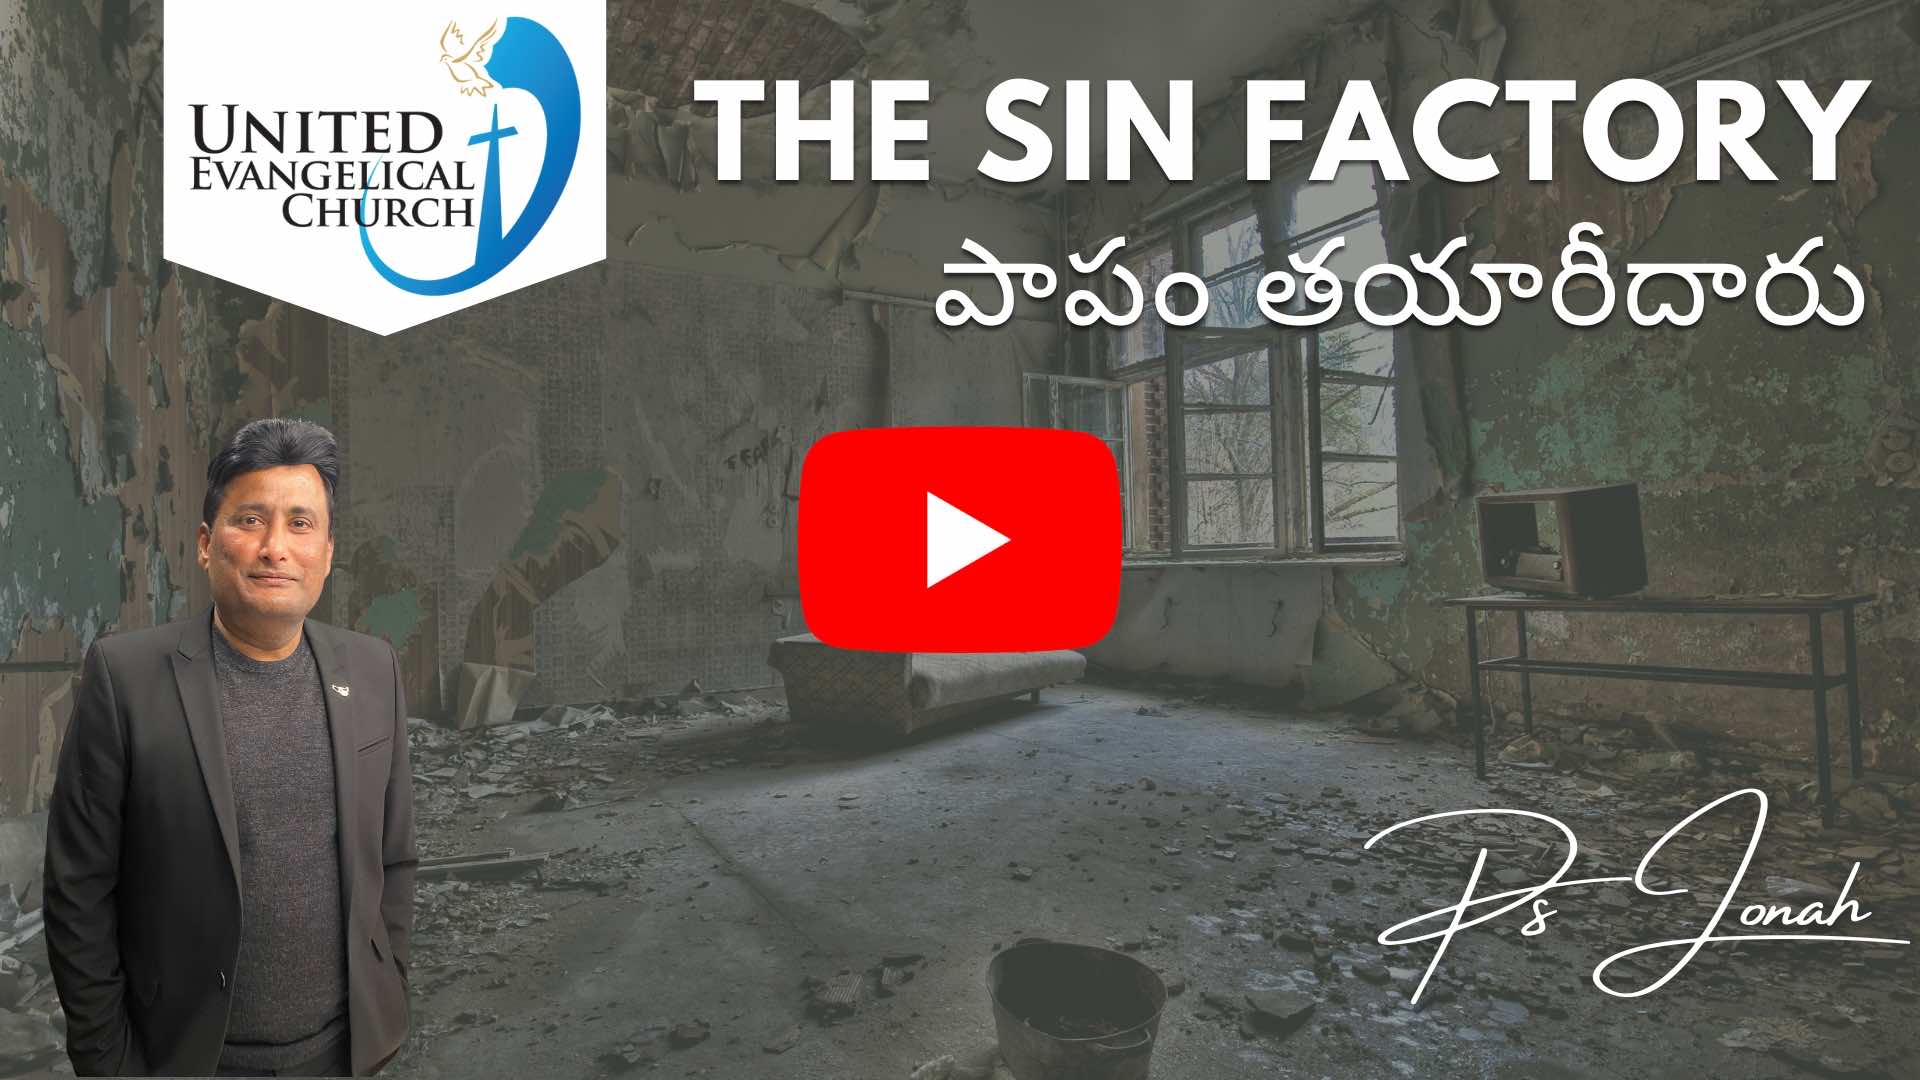 The Sin Factory - Rev Jonah Ravinder from United Evangelical Church - Auckland New Zealand